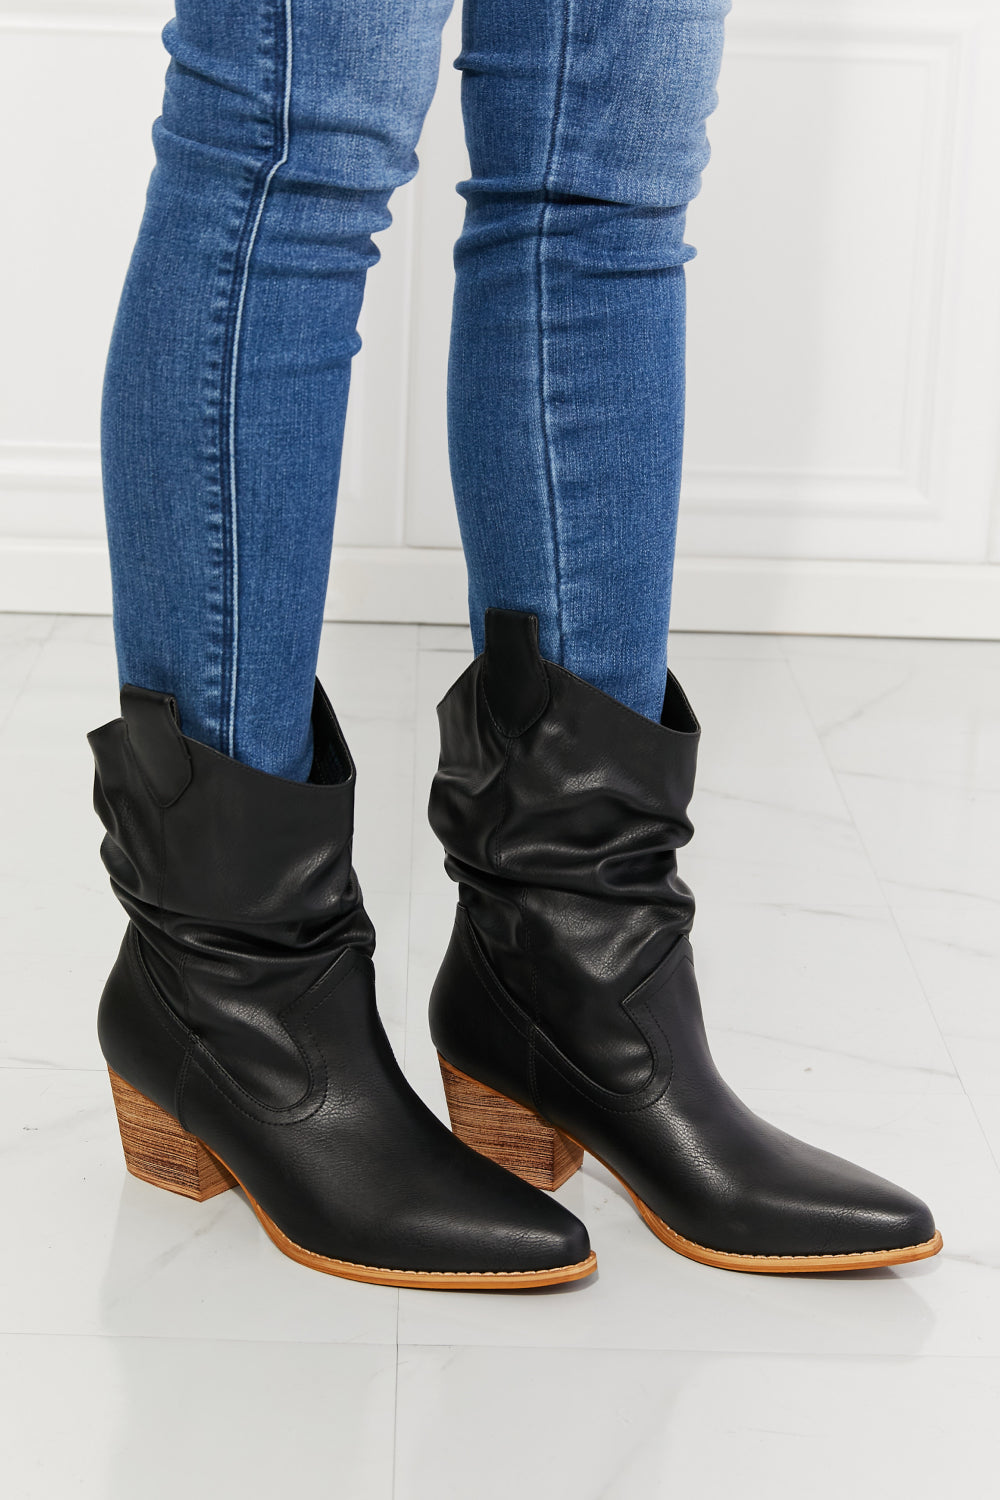 MMShoes Better in Texas Scrunch Cowboy Boots in Black - Cheeky Chic Boutique